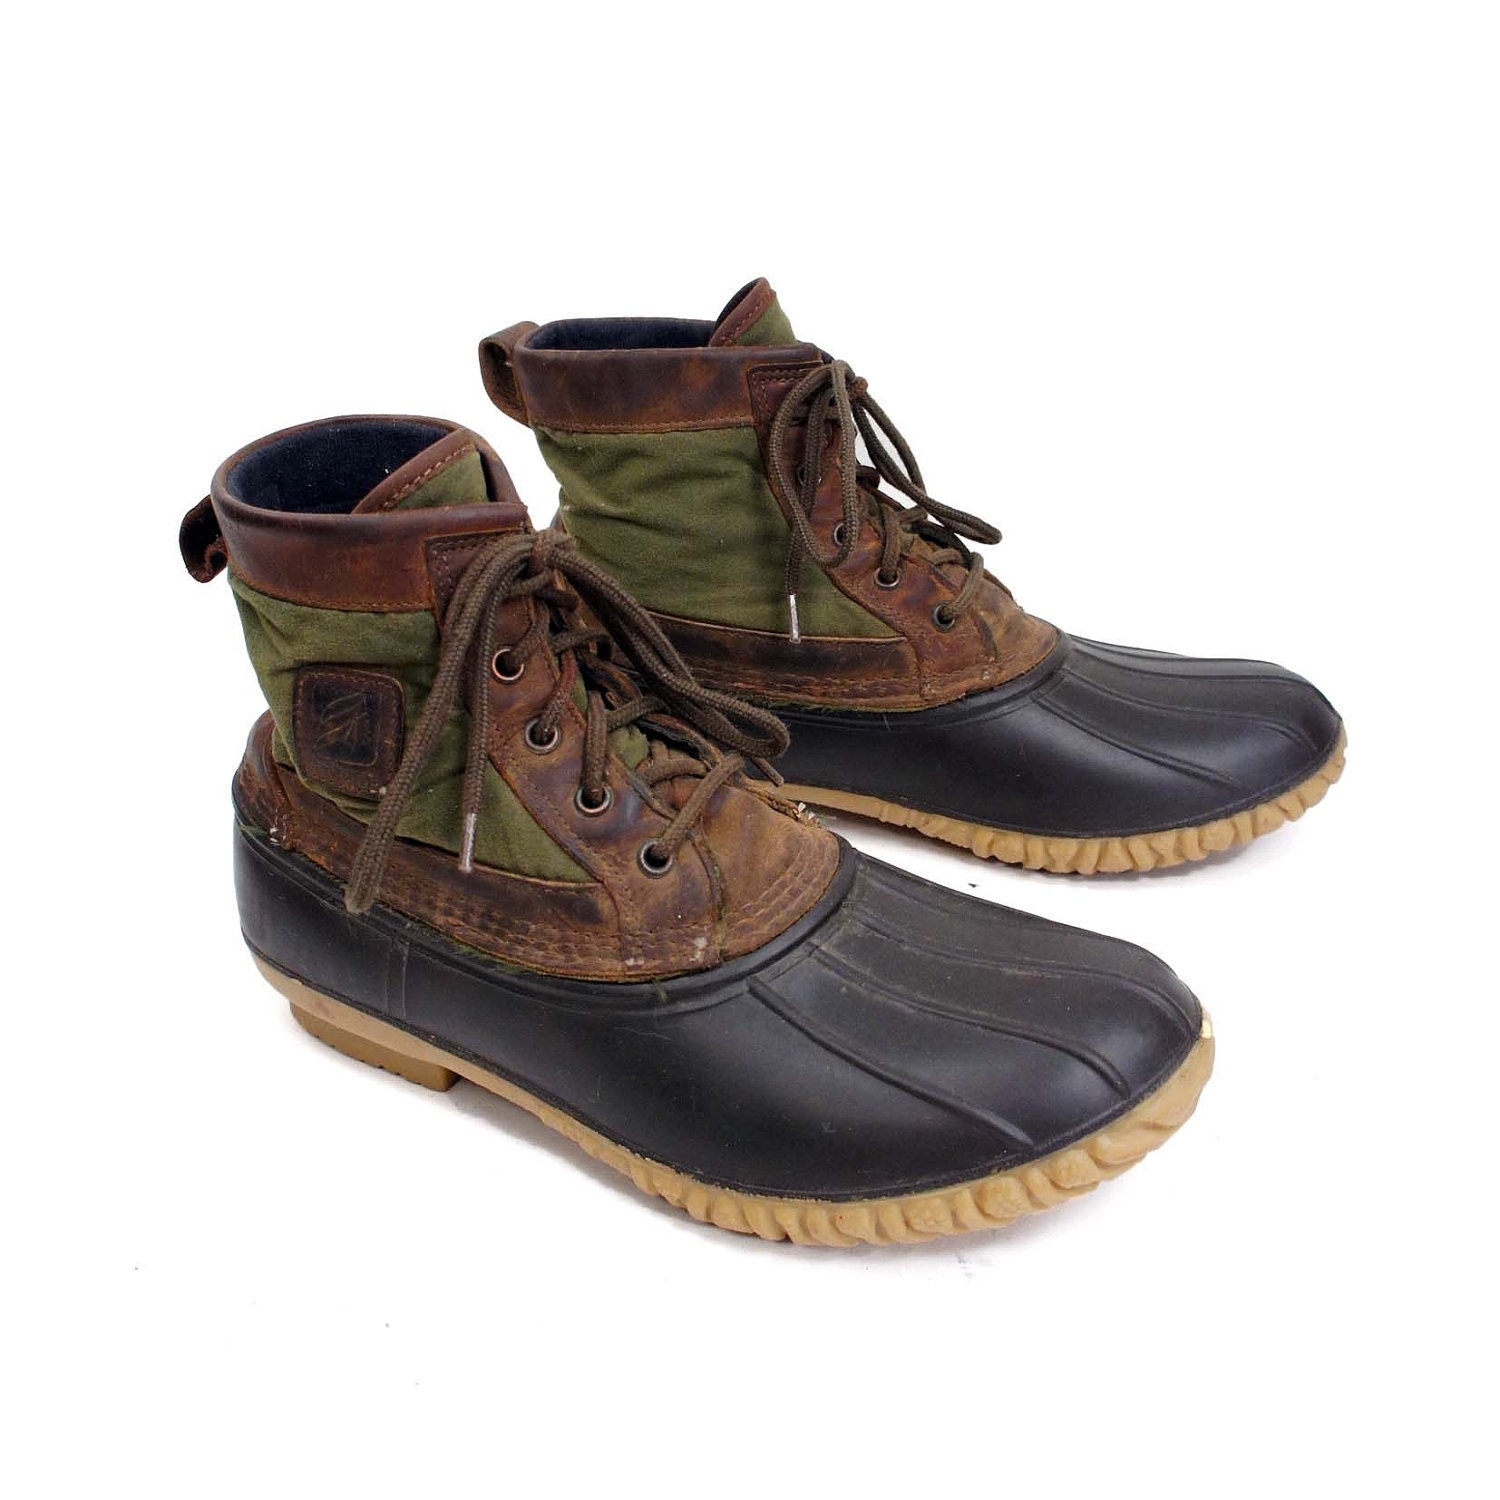 Men's Rain Boots / Duck Boots in Military Green and Brown